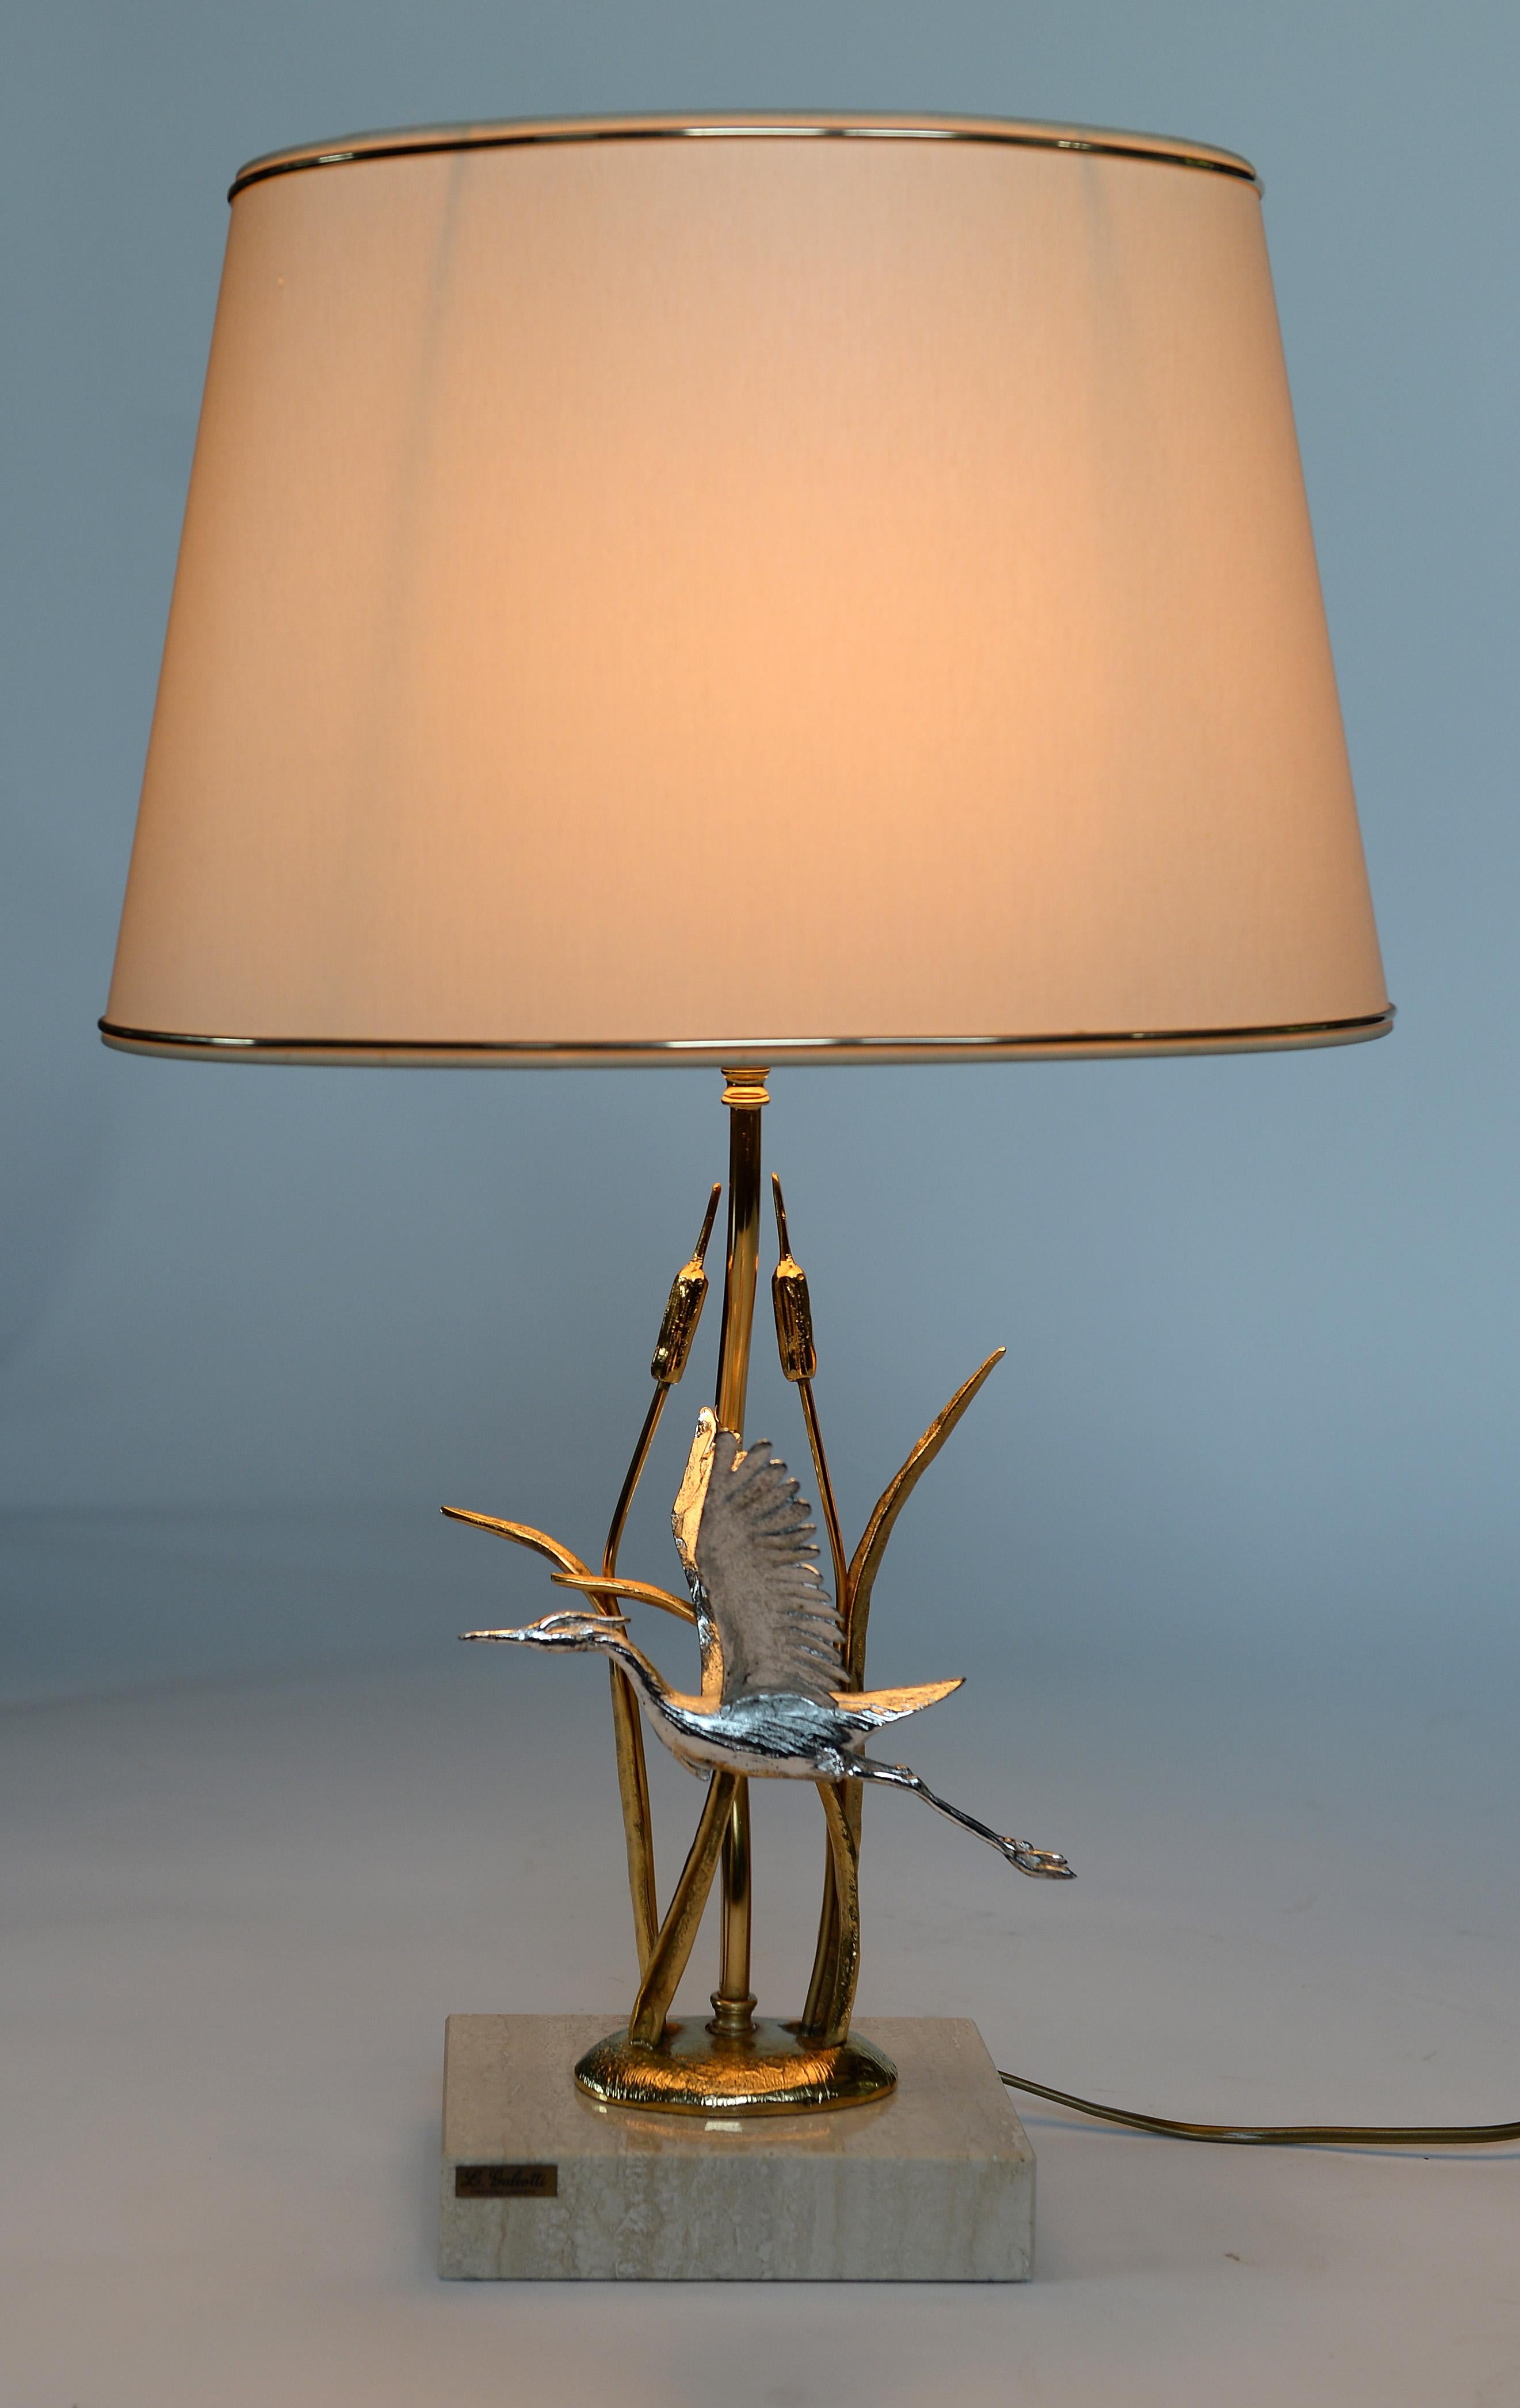 Vintage natural table lamp depicting a a flying heron between wheat.

The brass sculpture is mounted on a travertine stone base, which is typical for italian lamps.

The lamp is labeled and designed by Lanciotto Galeotti for